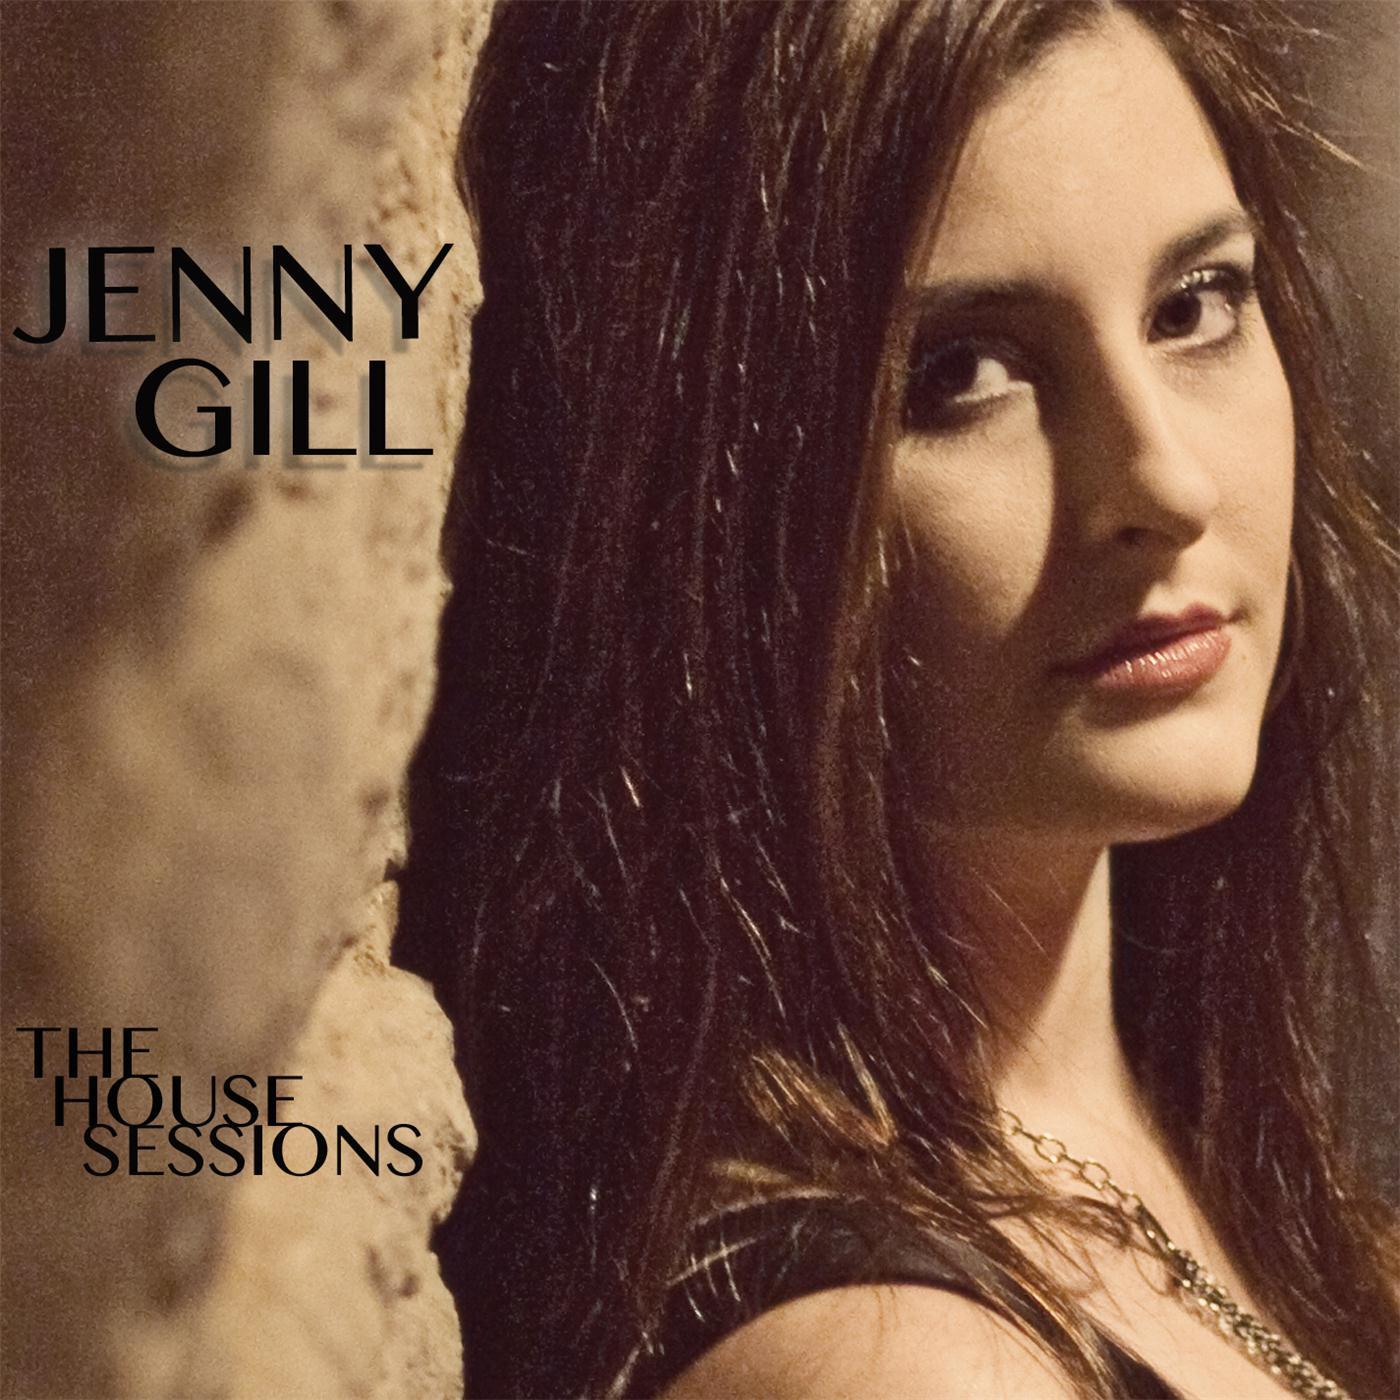 Jenny Gill - Look Where Loving You Landed Me